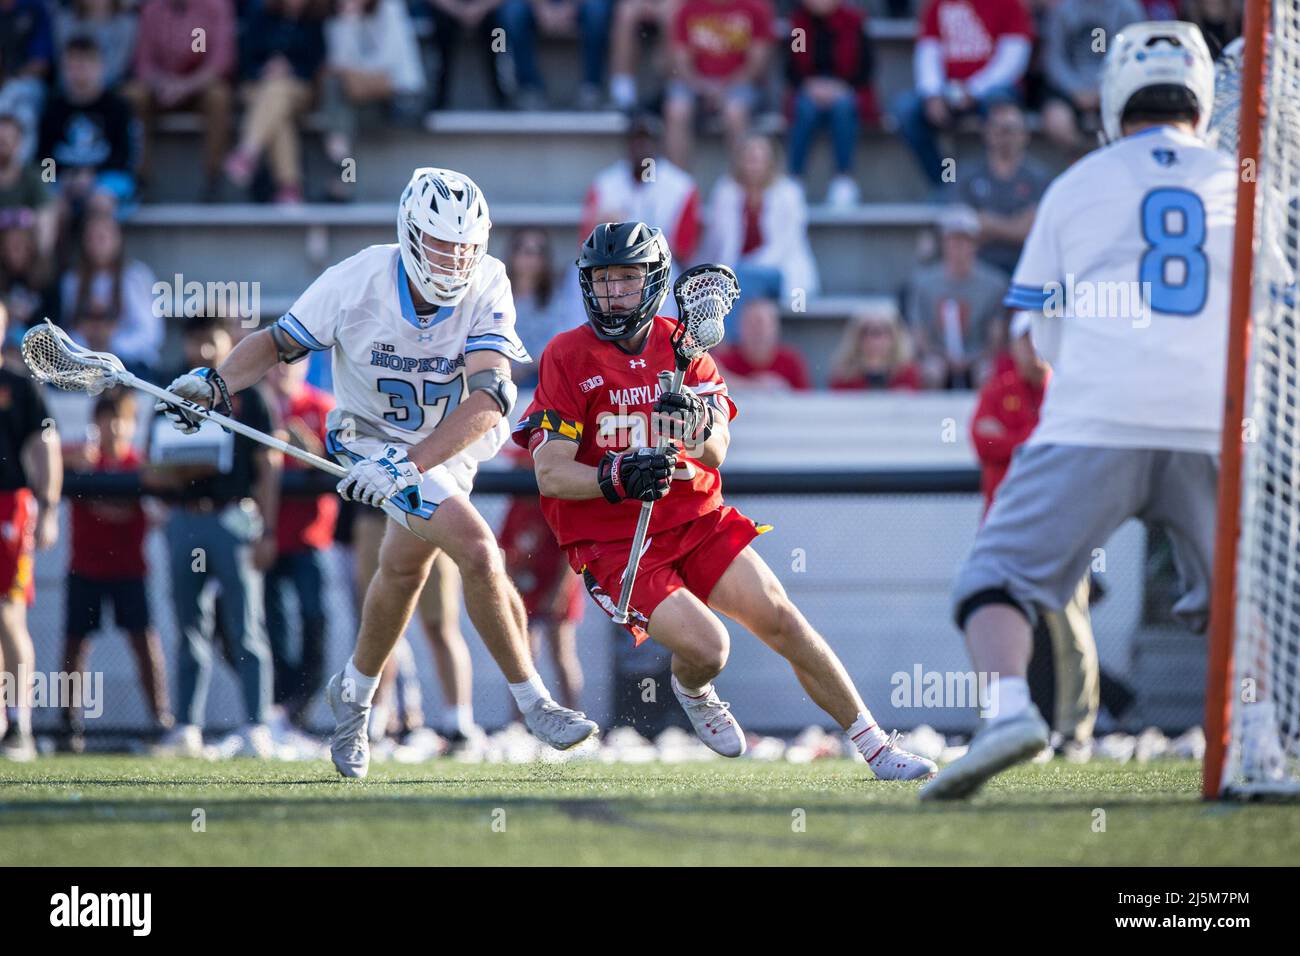 April 23, 2022: Maryland attack Kyle Long (23) score the opening goal in 29 seconds during the ncaa men's lacrosse regular season finale between the Maryland Terrapins and the Johns Hopkins Blue Jays at Homewood Field in Baltimore, Maryland Photographer: Cory Royster Stock Photo